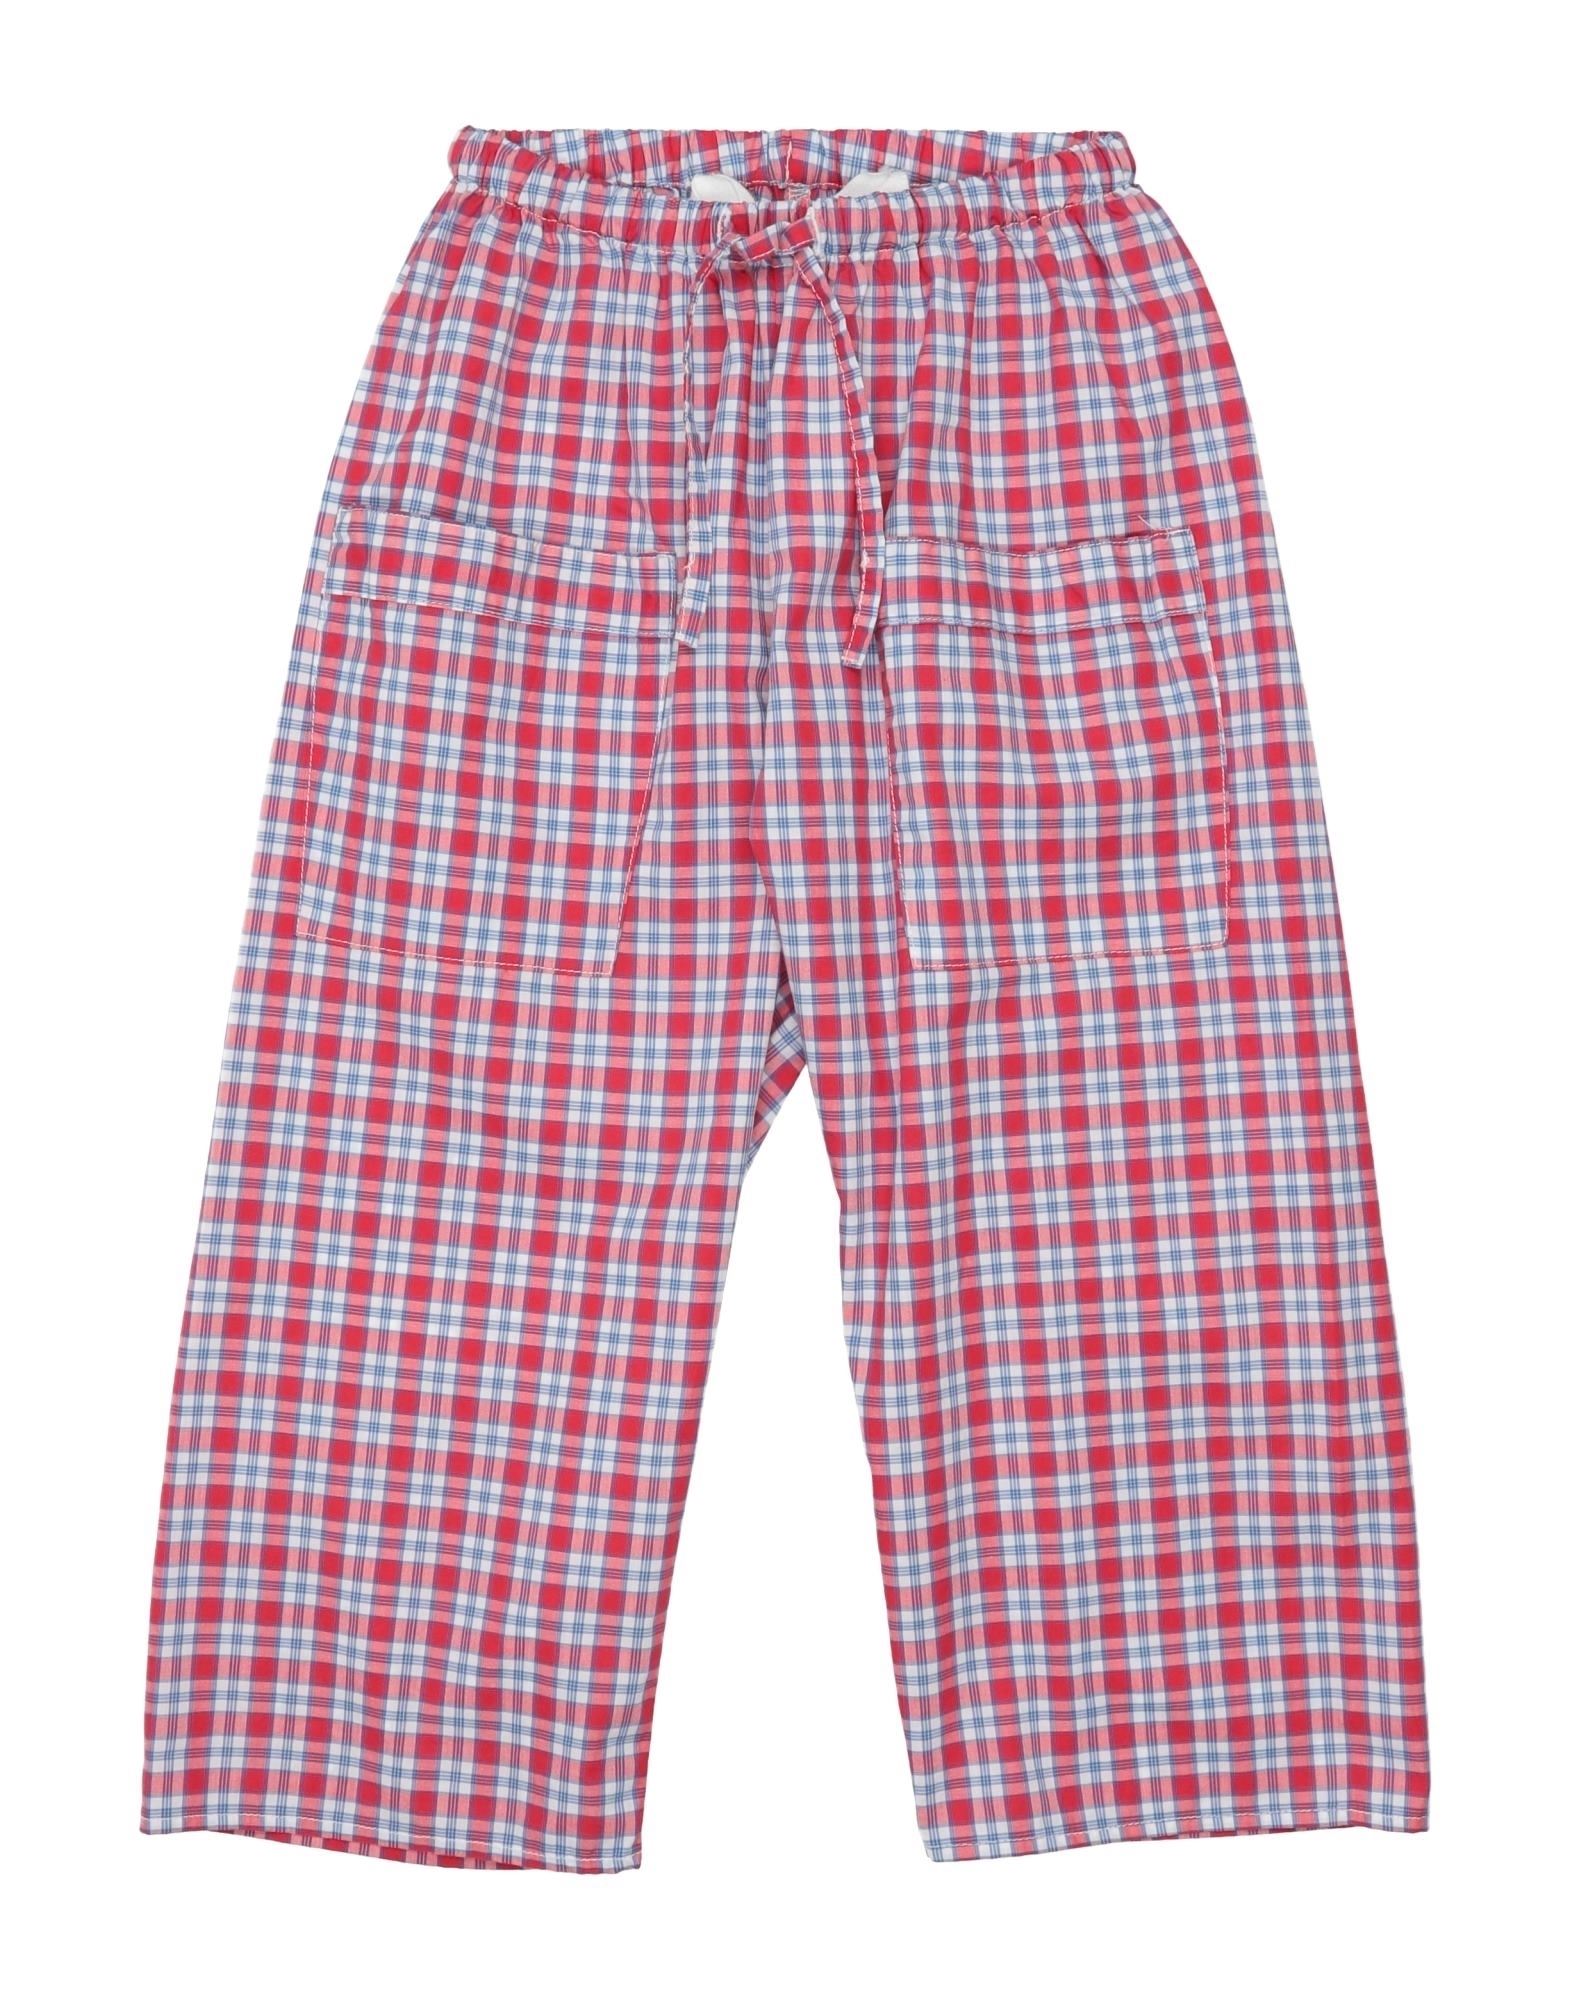 Touriste Kids'  Pants In Red